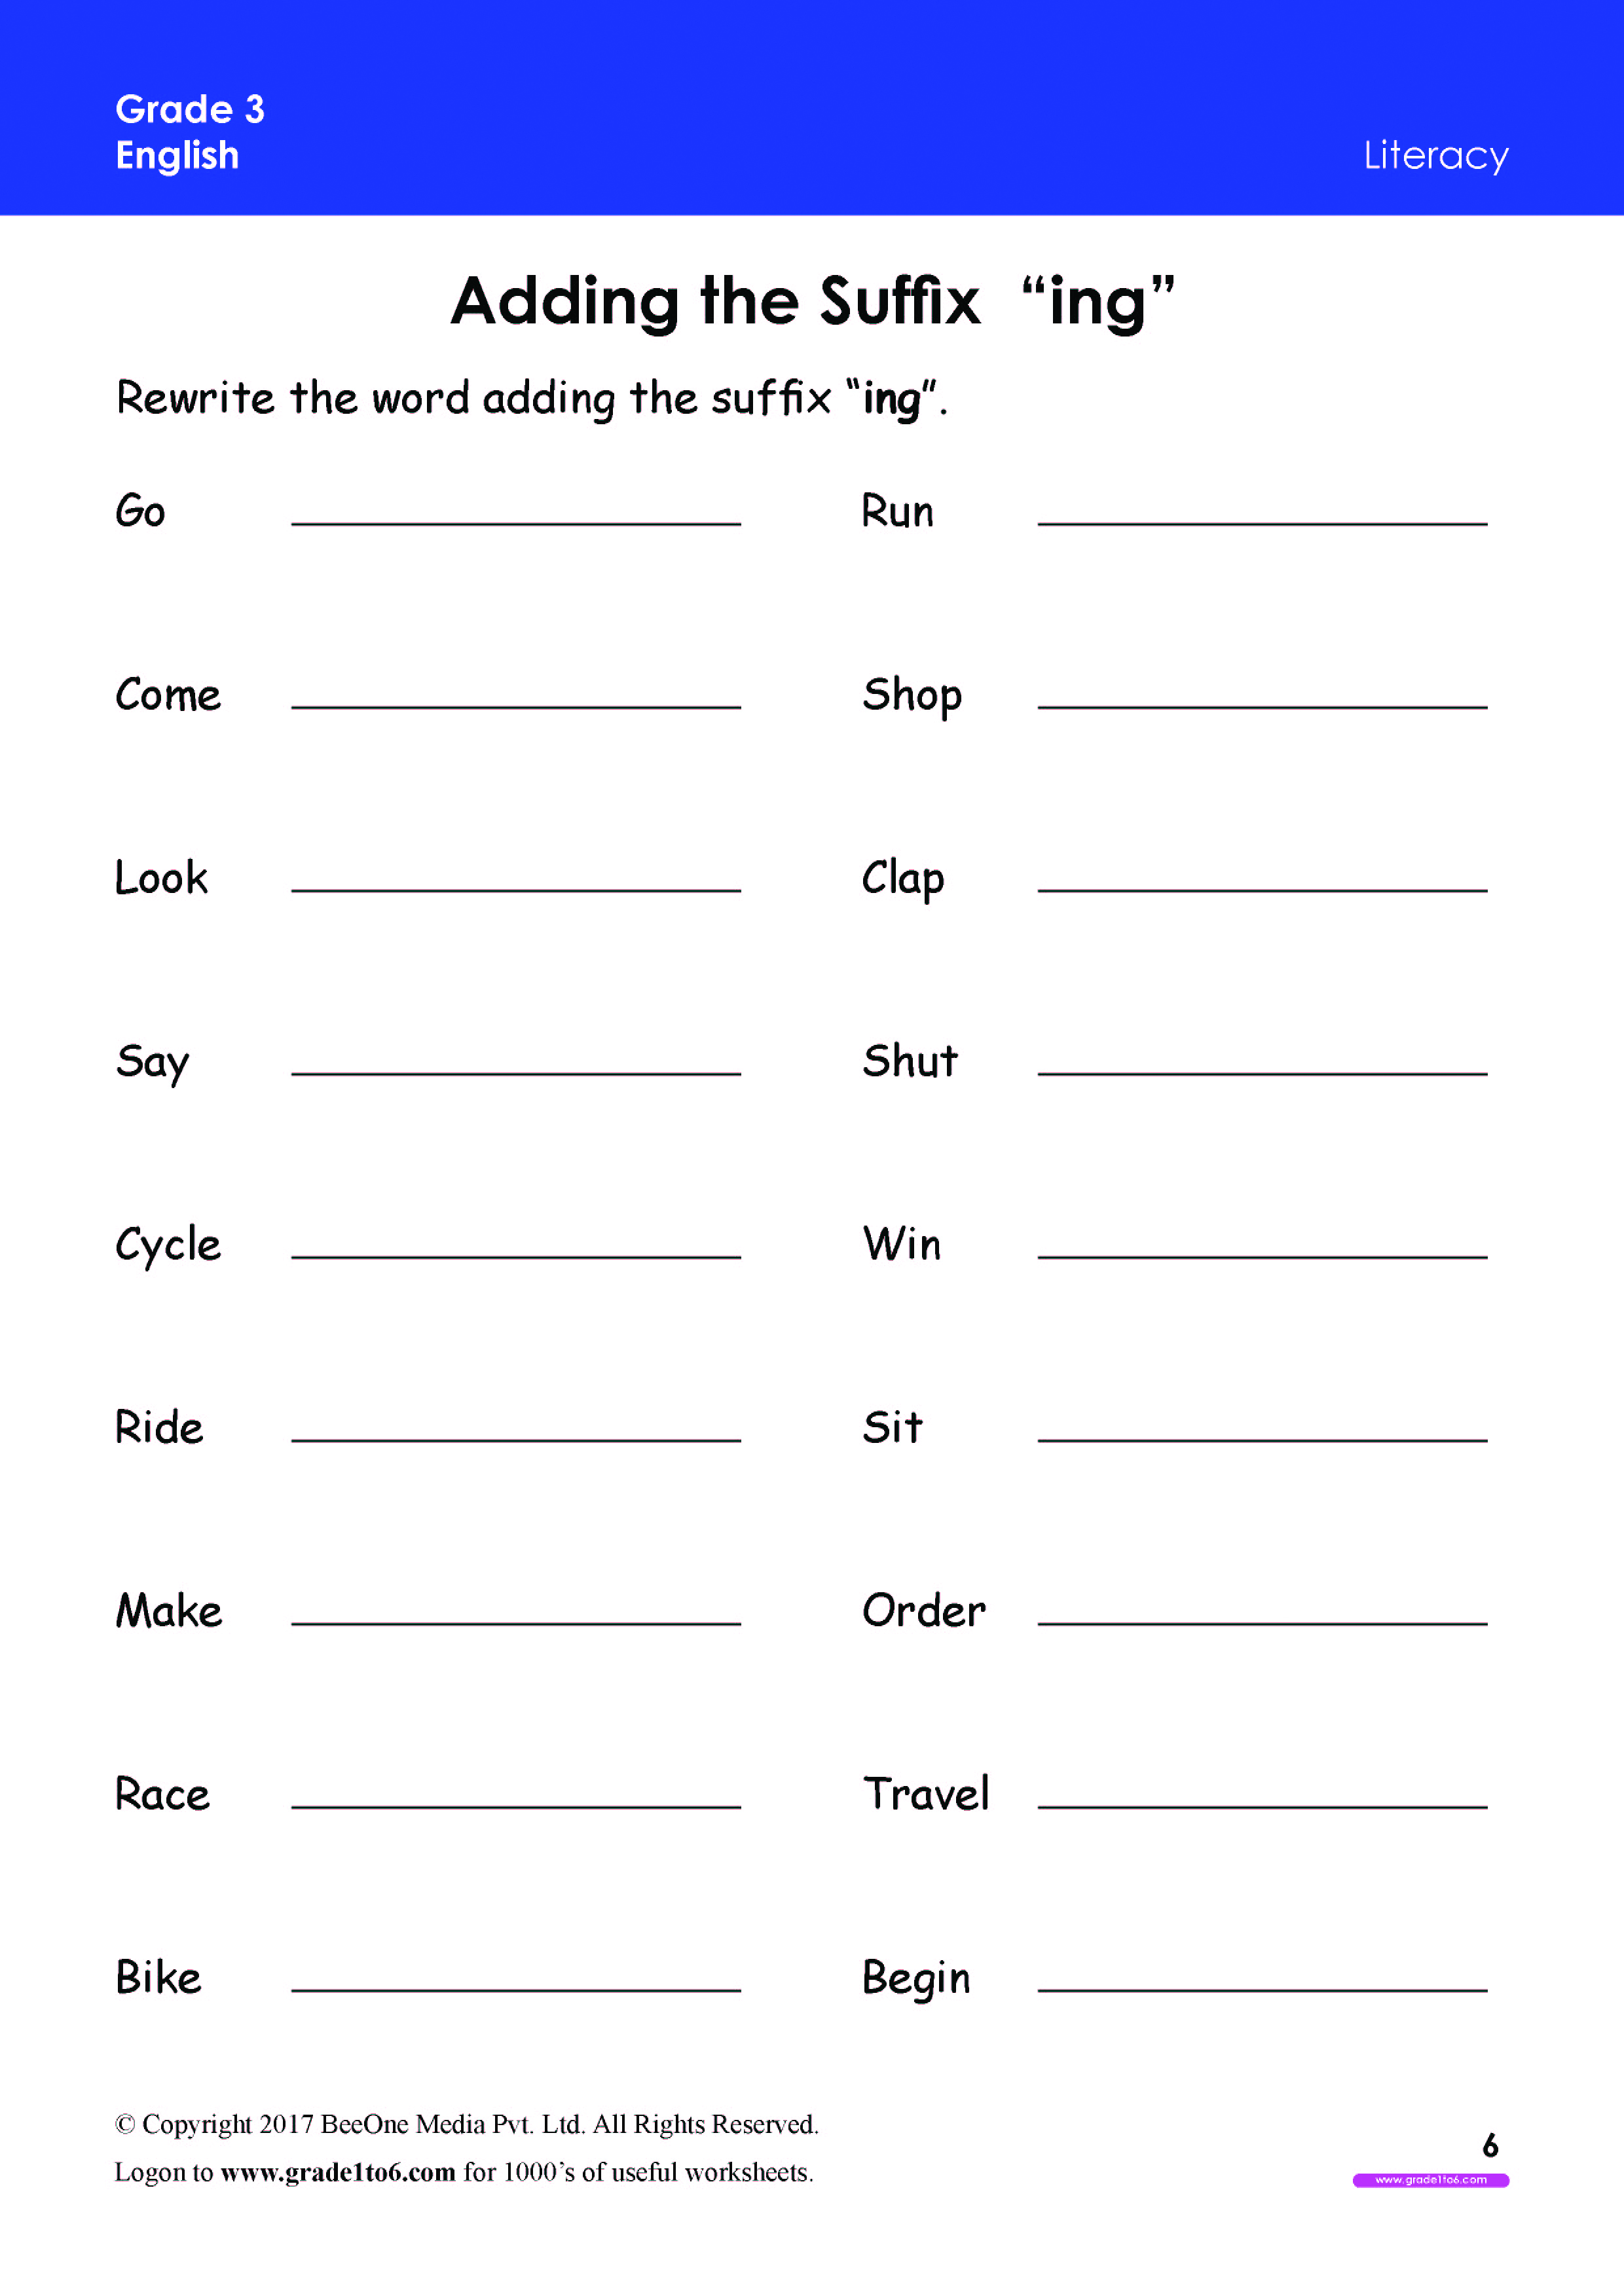 suffix-worksheets-grade-3-www-grade1to6